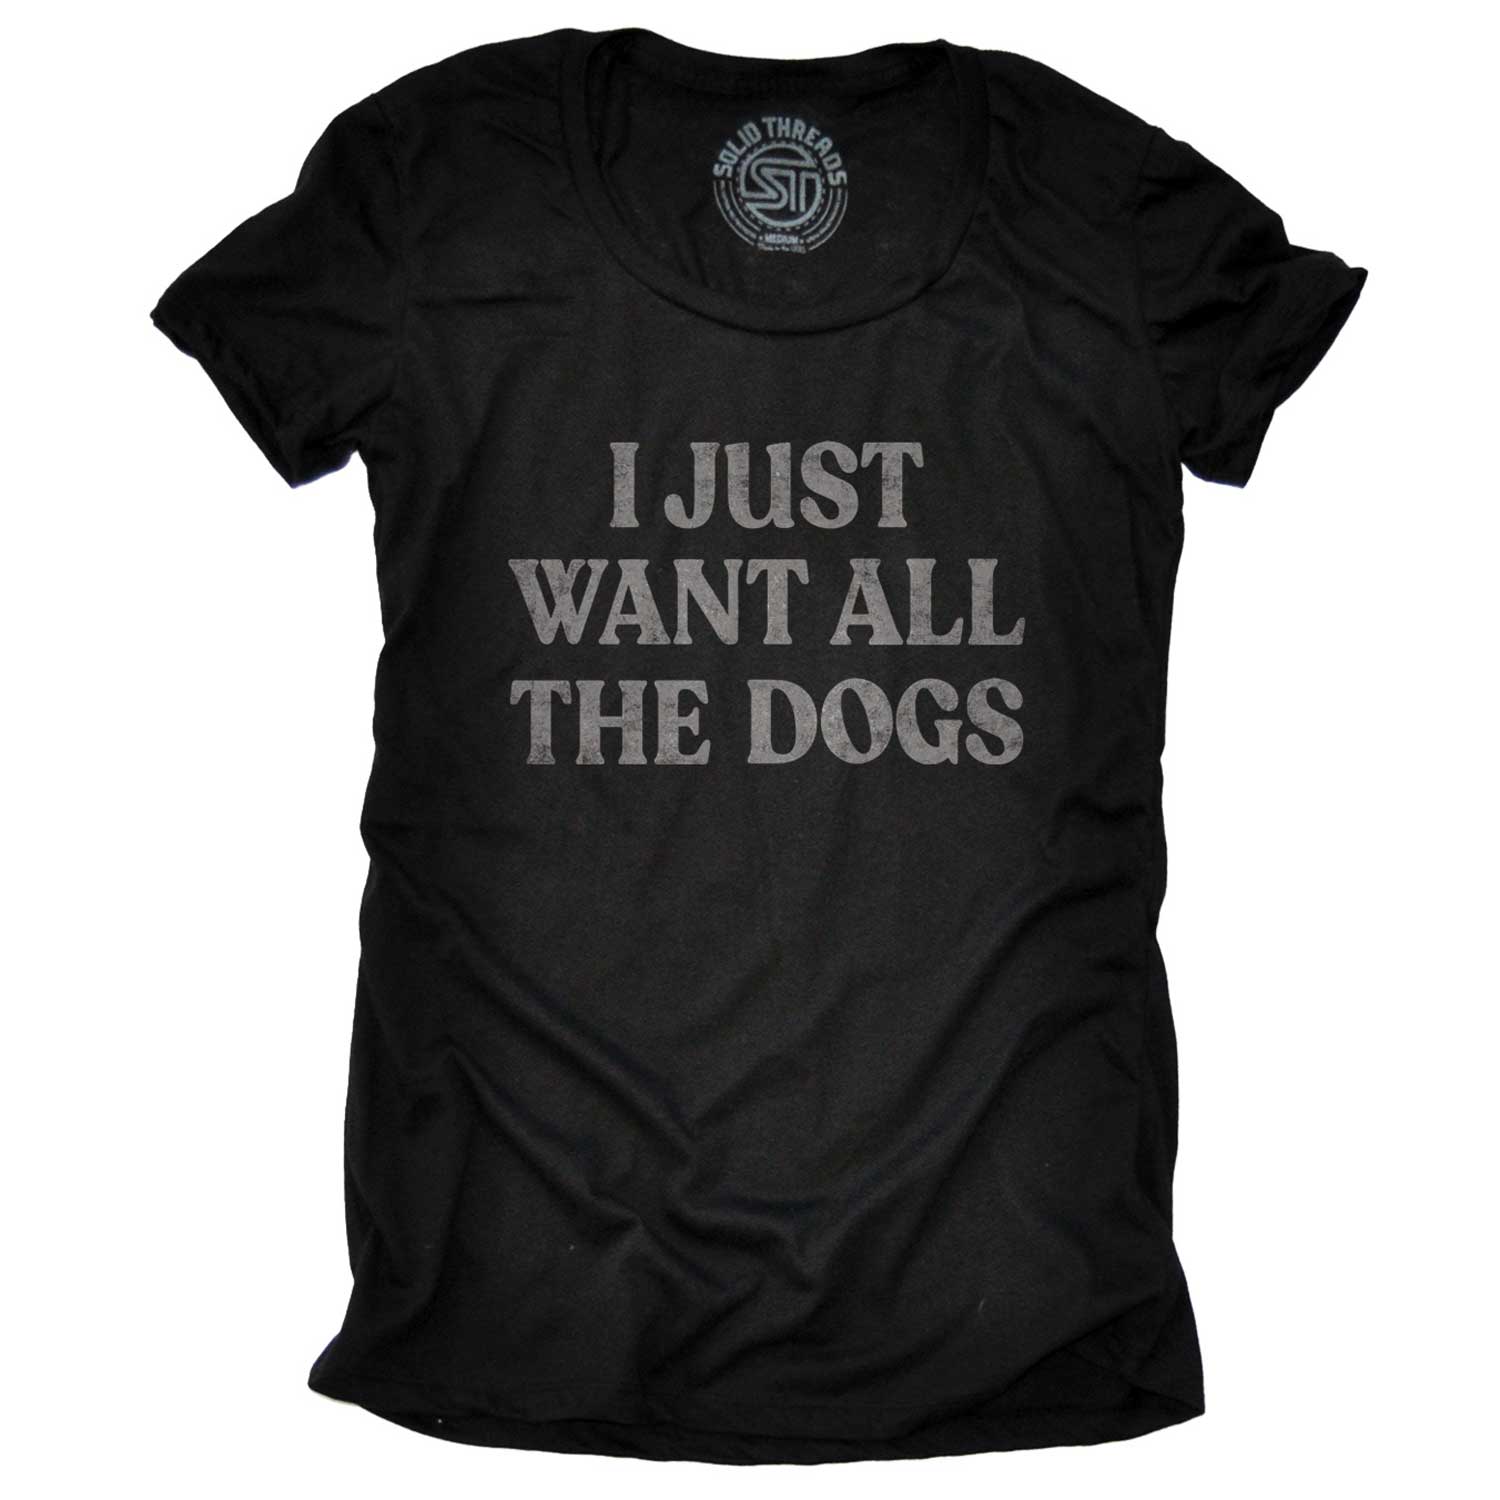 Women's Want All The Dogs Funny Graphic Tee | Vintage Animal Lovers Soft T-shirt | Solid Threads